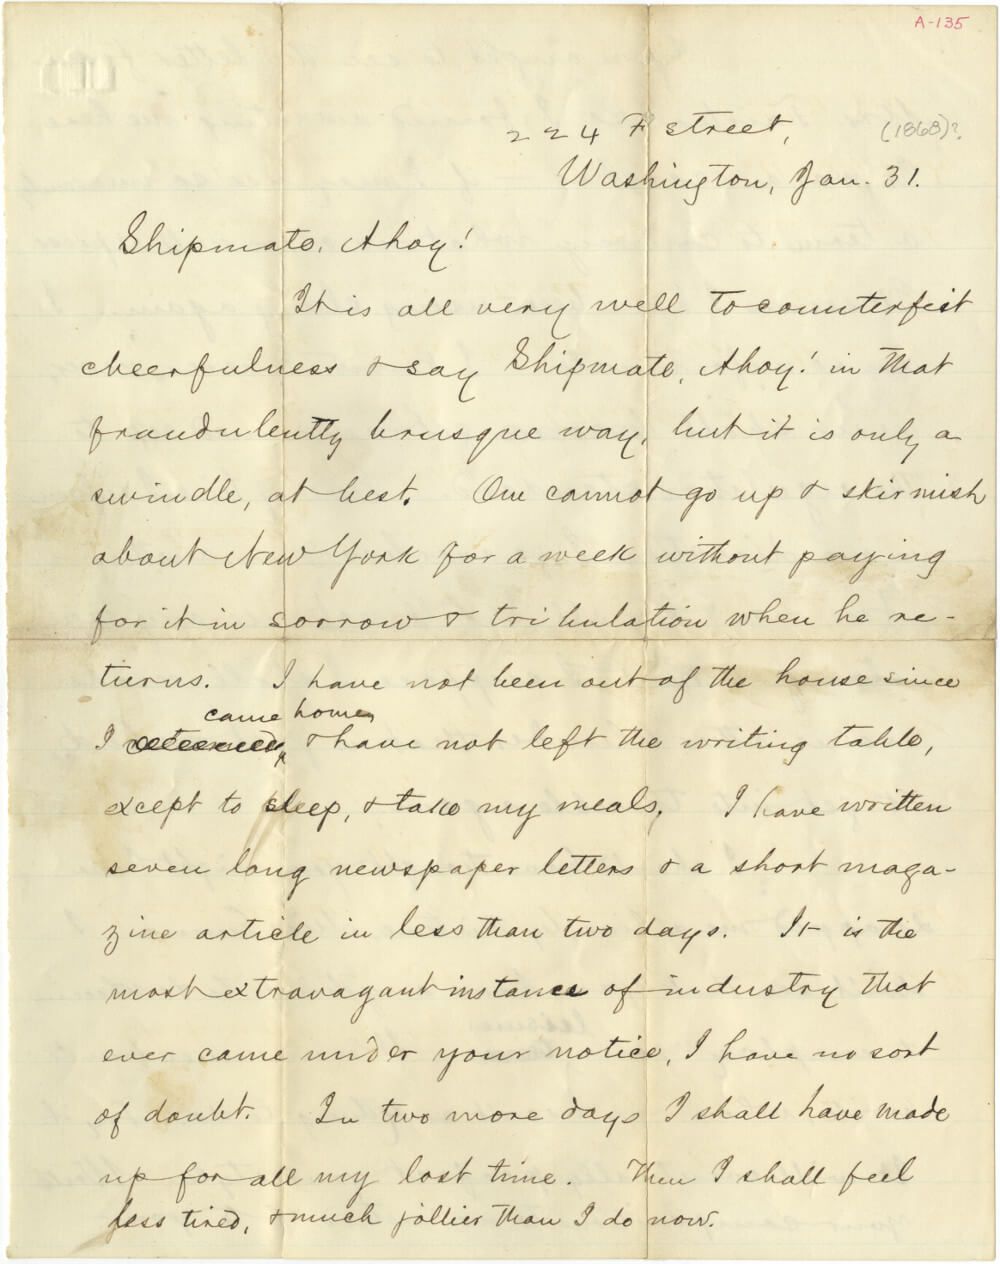 Twain Asks His Young "Quaker City" Shipmate & Favorite, Emma Beach, For Help With His Articles About the Voyage 